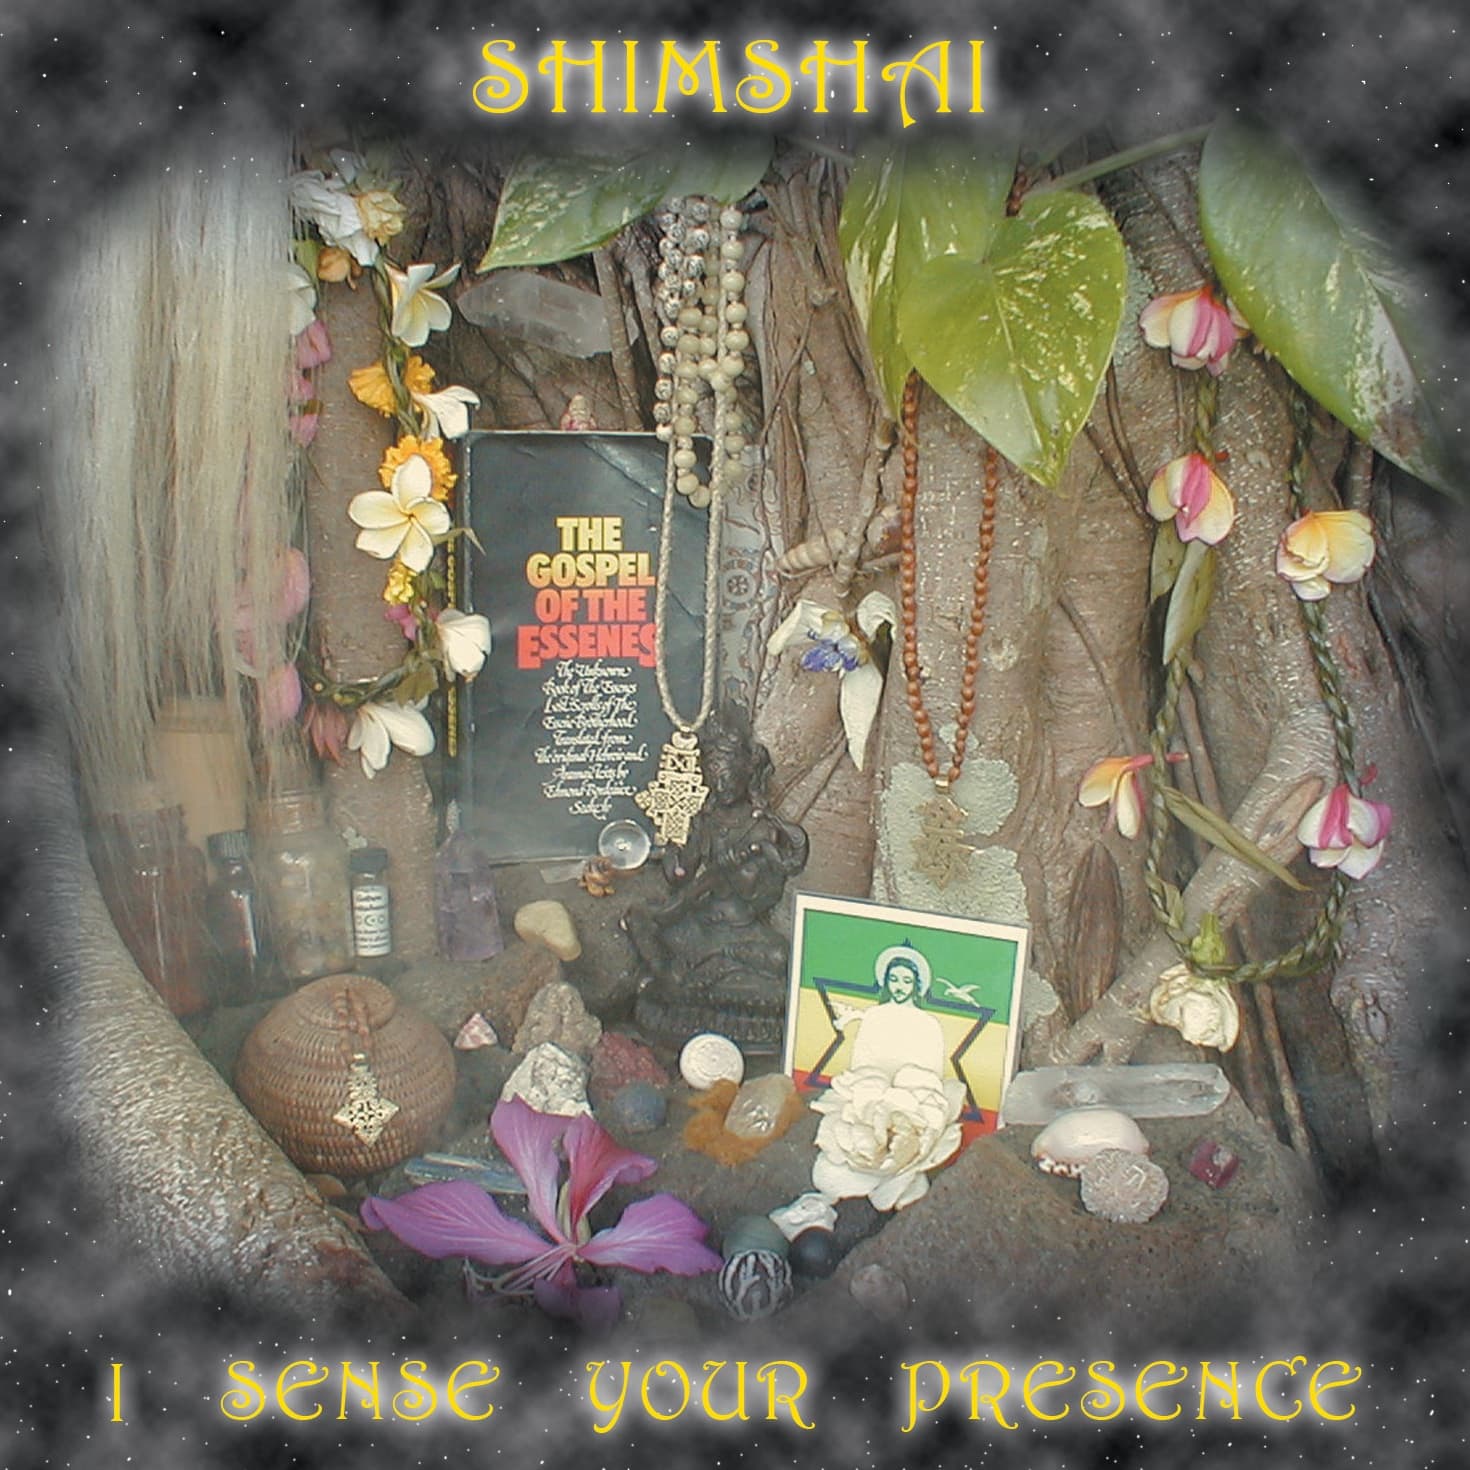 Revisit Shimshai’s first recording, ‘I Sense Your Presence,’ featuring scripture of the Ancient Essenes.